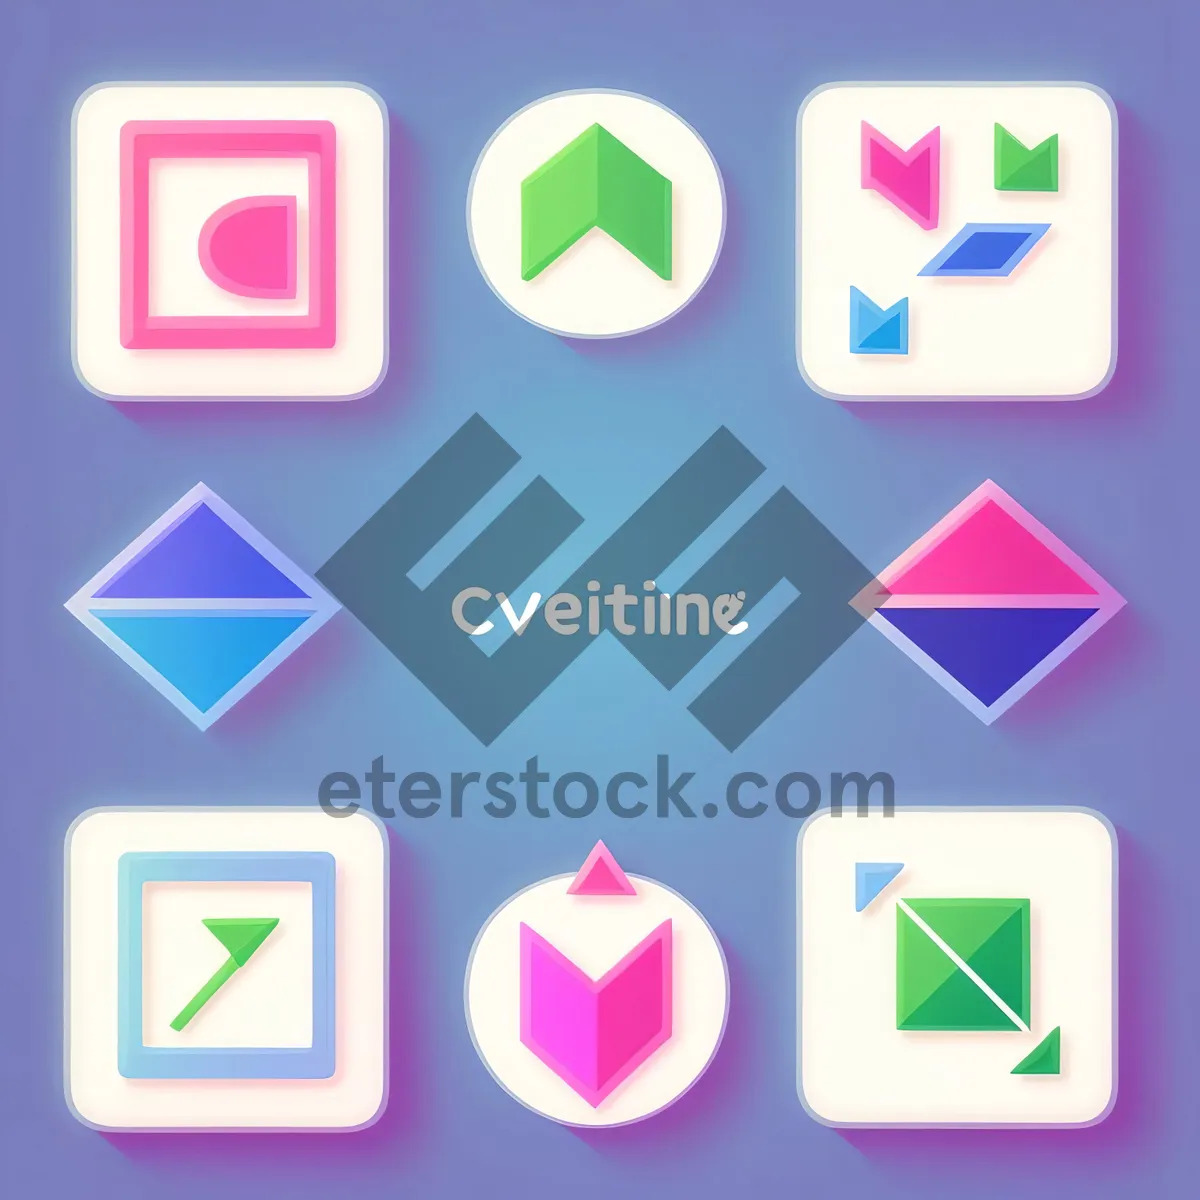 Picture of Web Buttons: Icon Set 
OR
Glossy Web Button Collection 
OR
Shiny Glass Button Set 
OR
Square Icon Buttons: Website 
OR
Symbolic Web Interface Icons